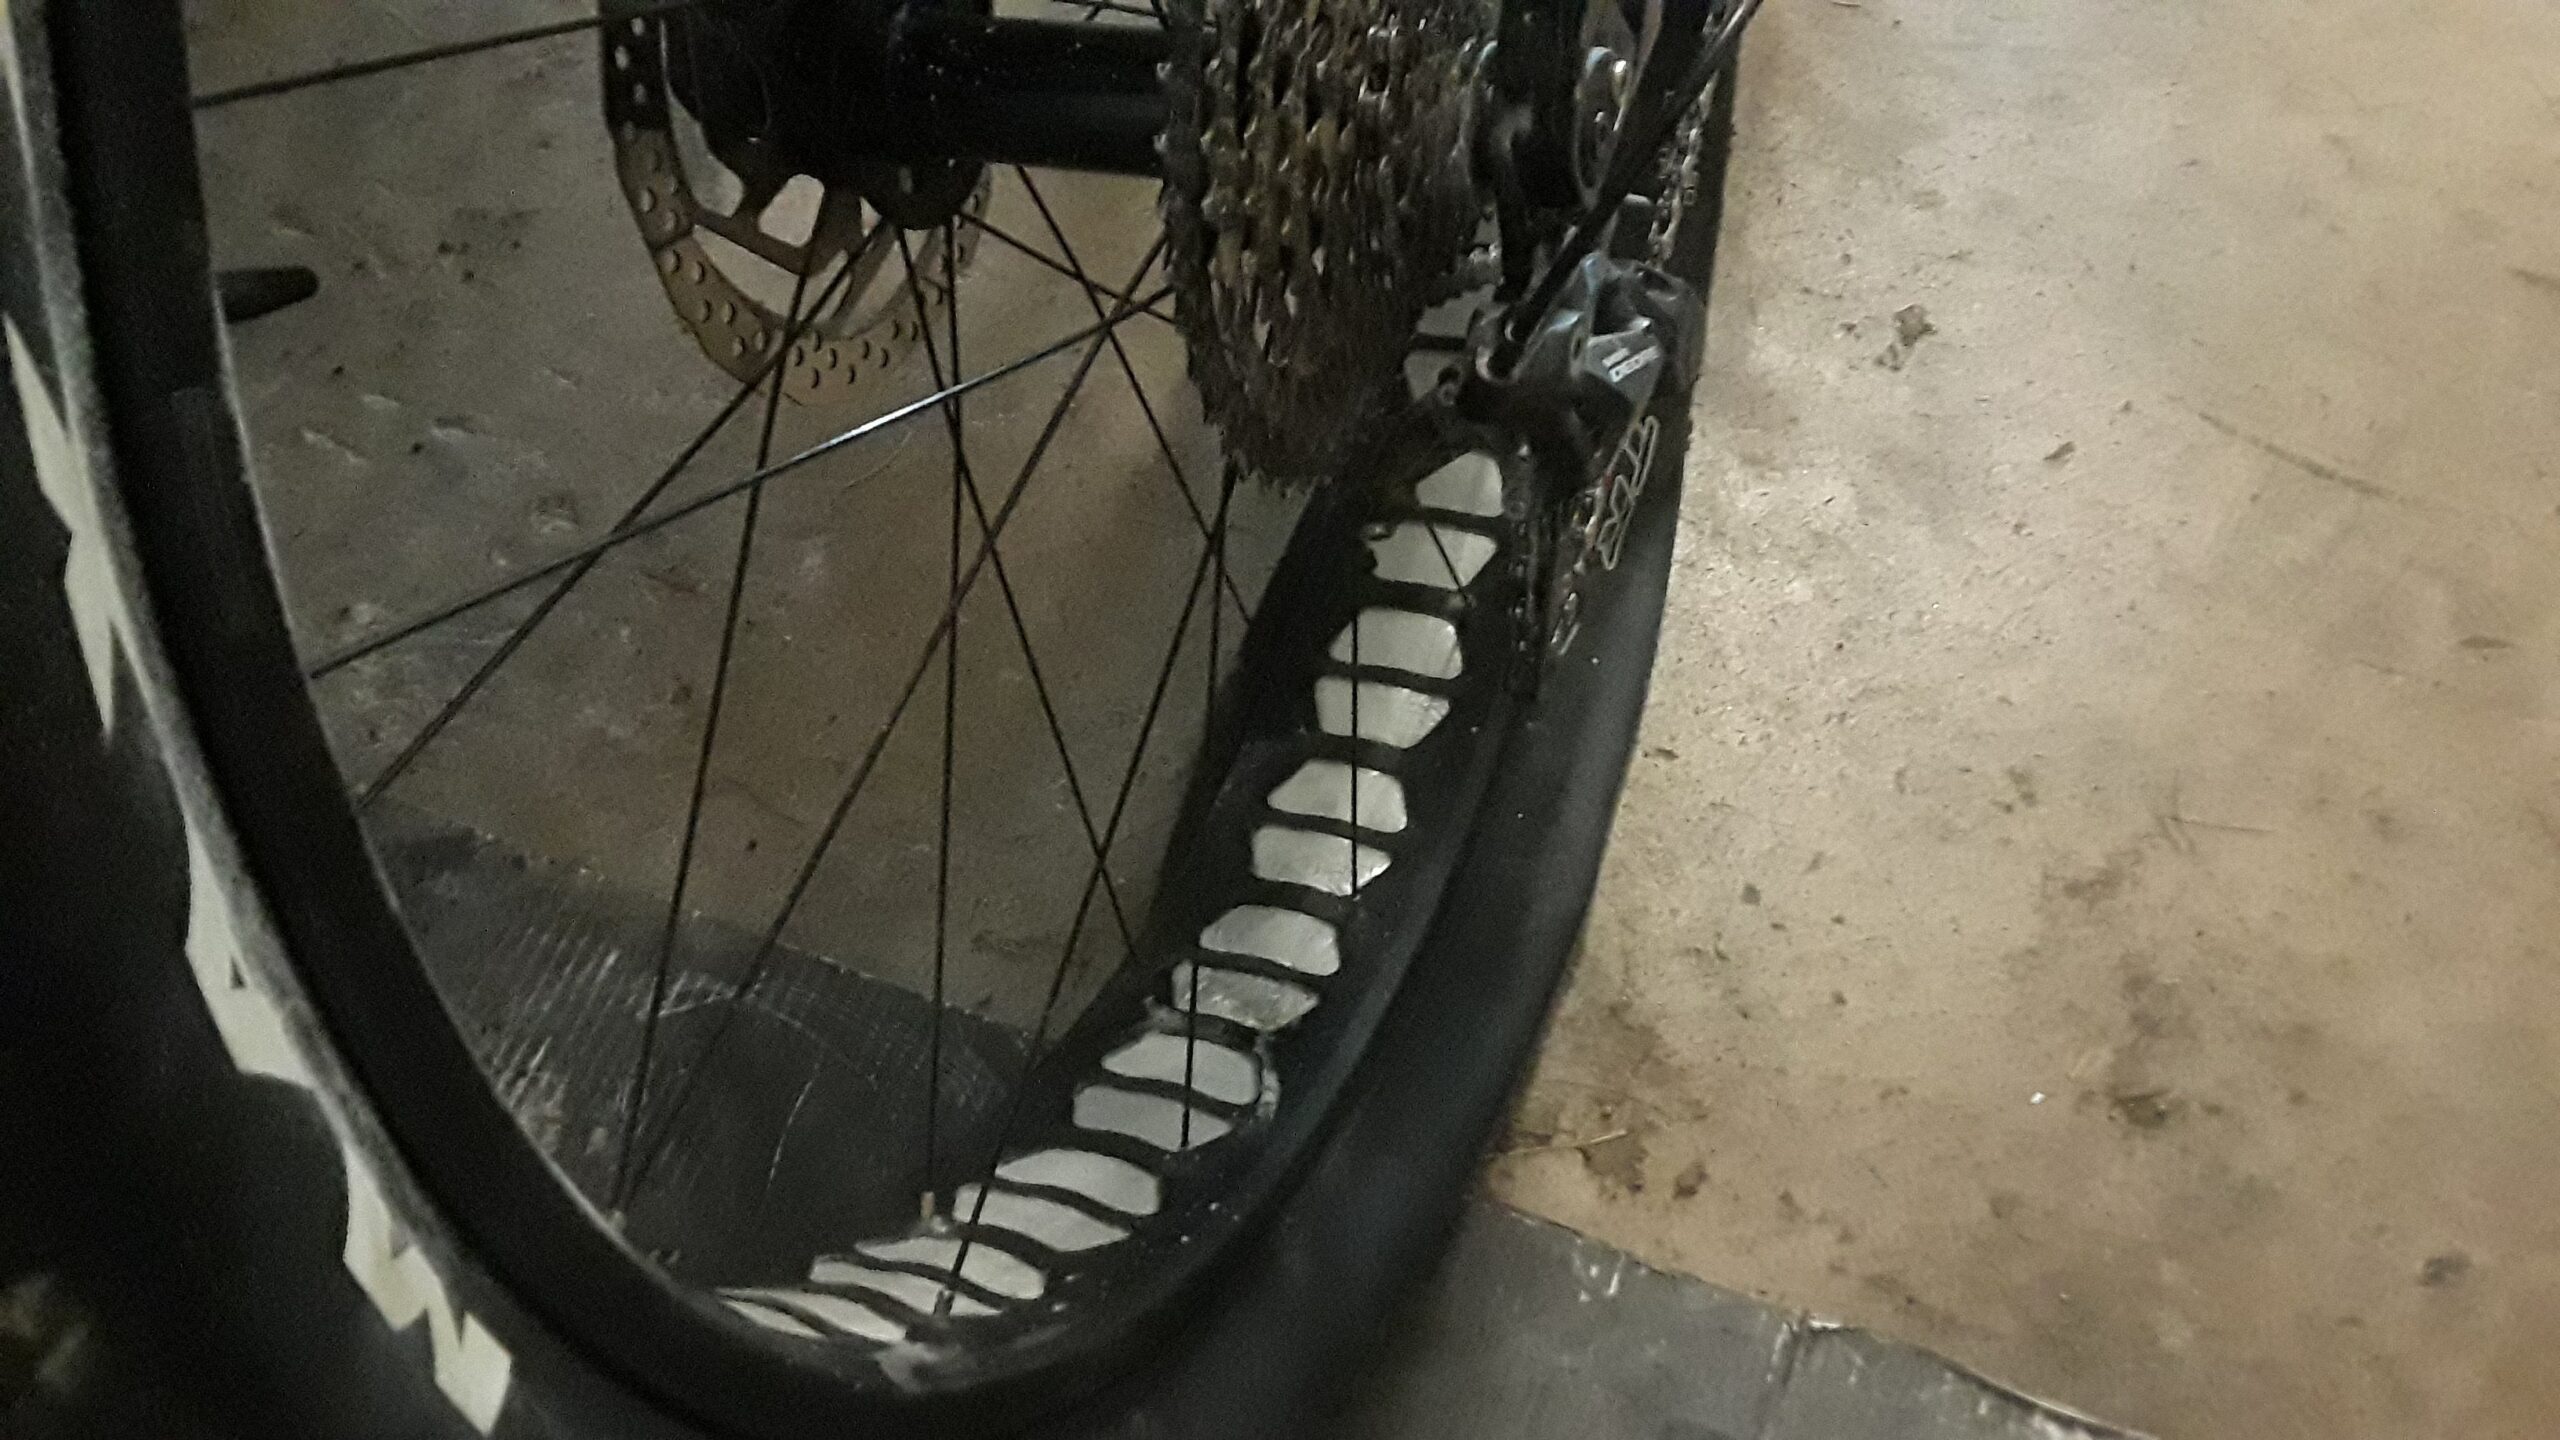 At my wit’s end – a tubeless conversion tale